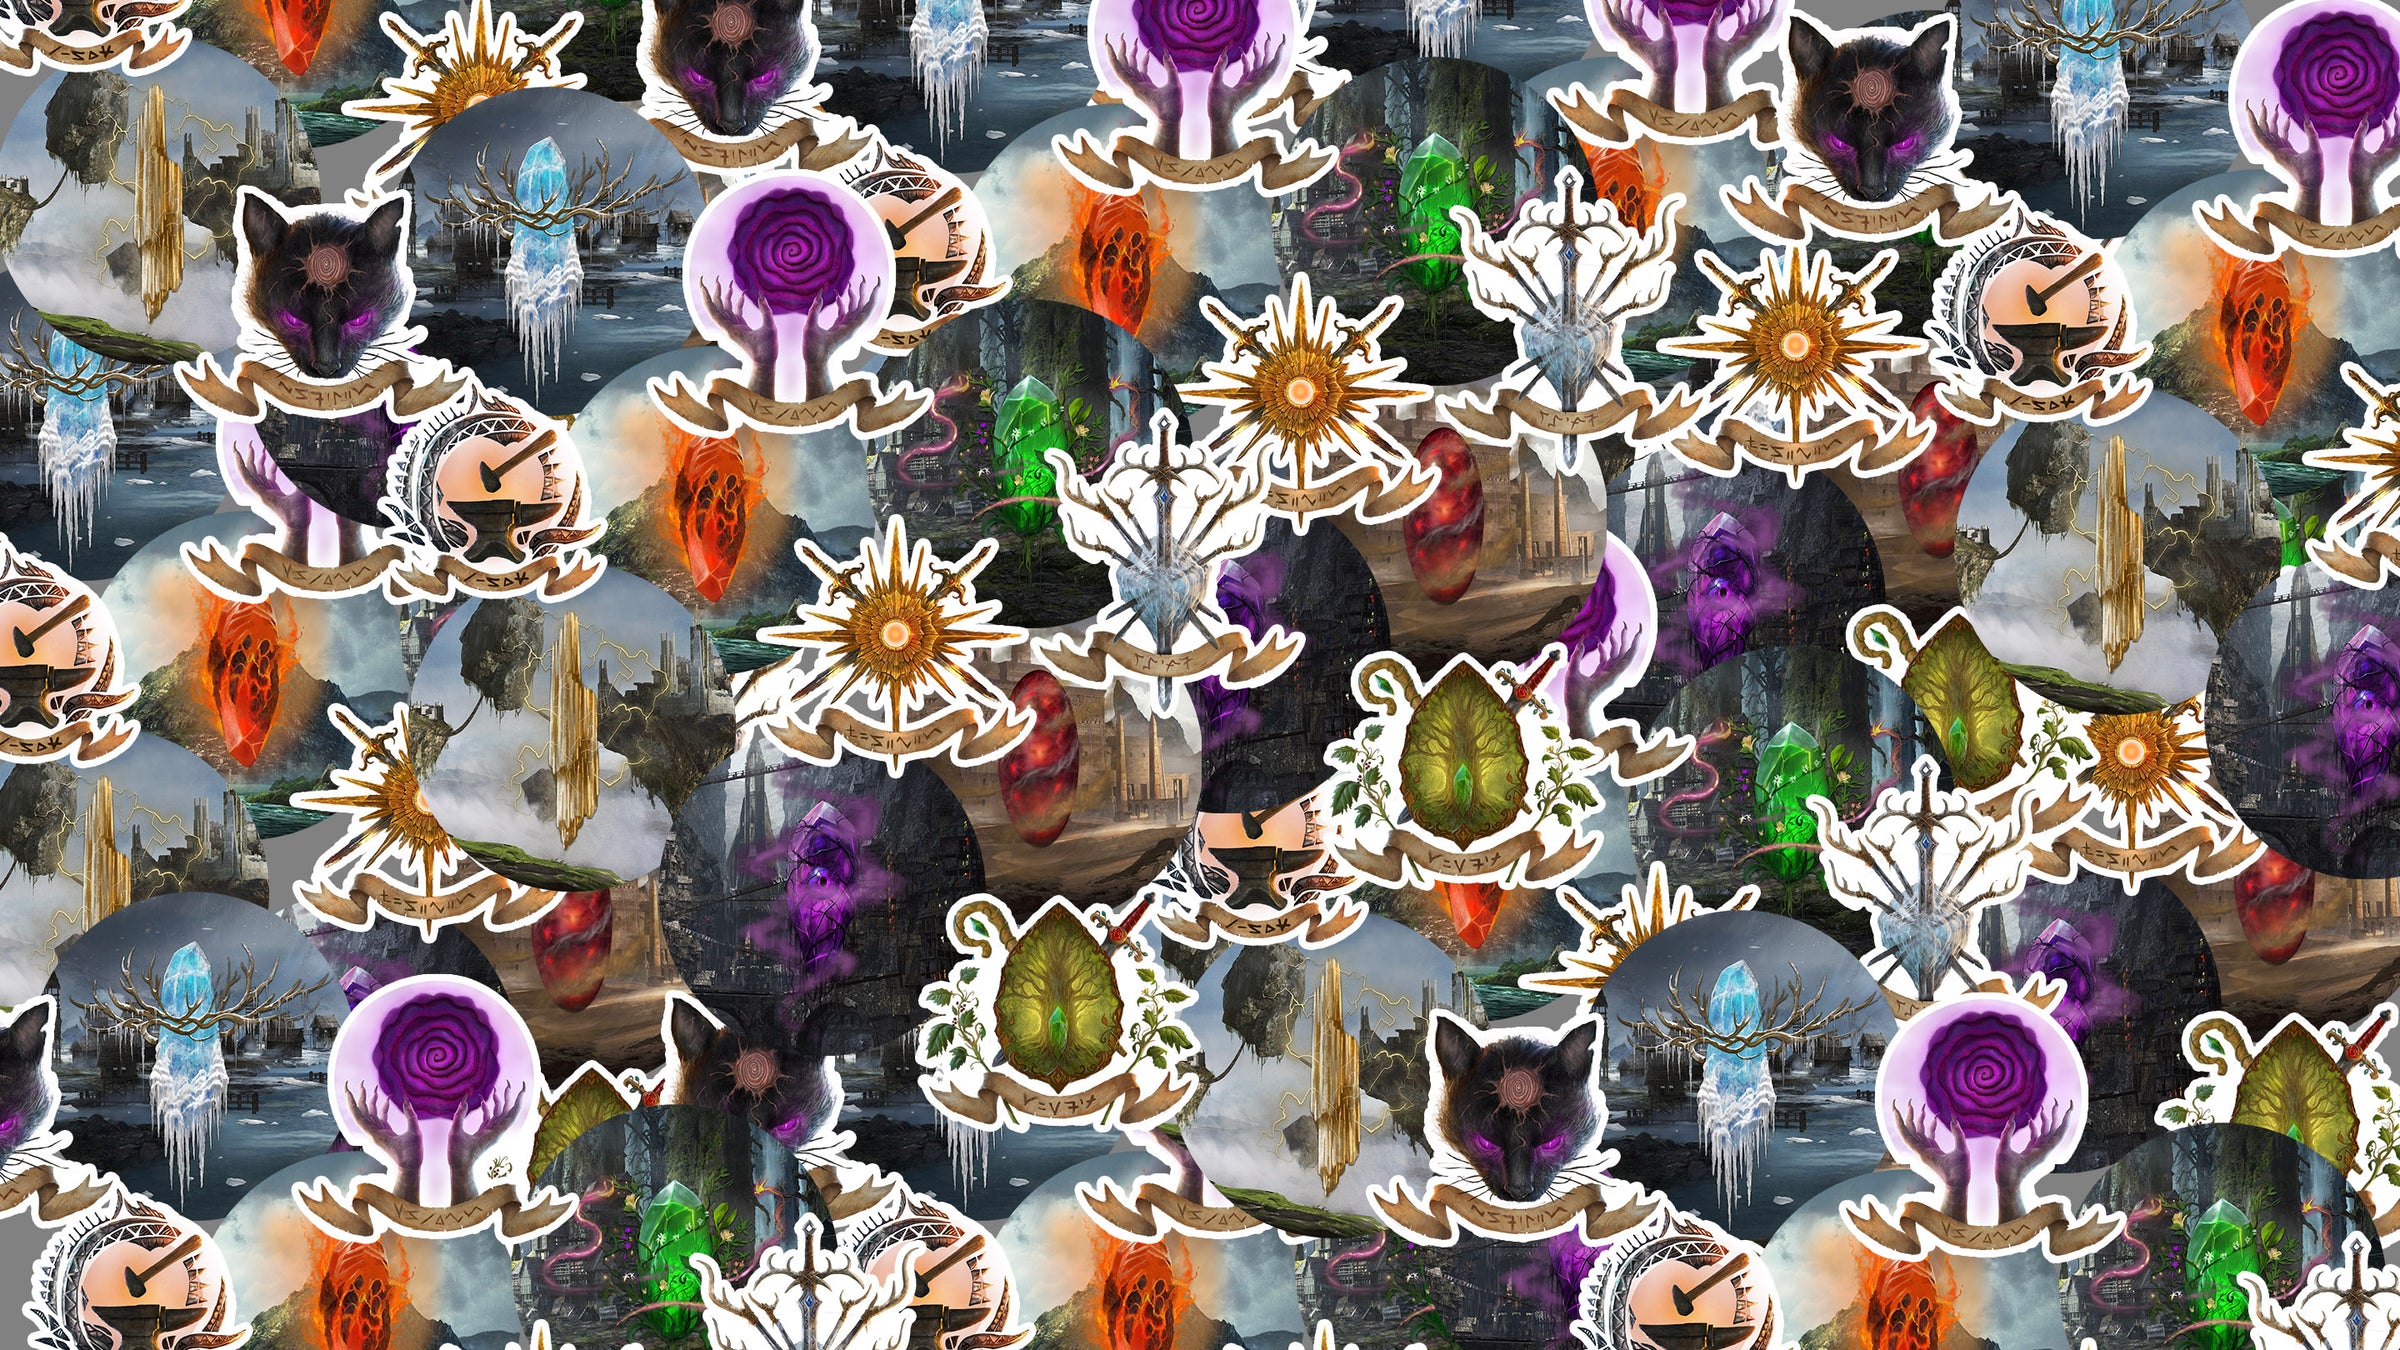 homepage banner featuring dark fantasy arpg kristala clans of kristala clan crest stickers laid out in a large collage with many copies of each